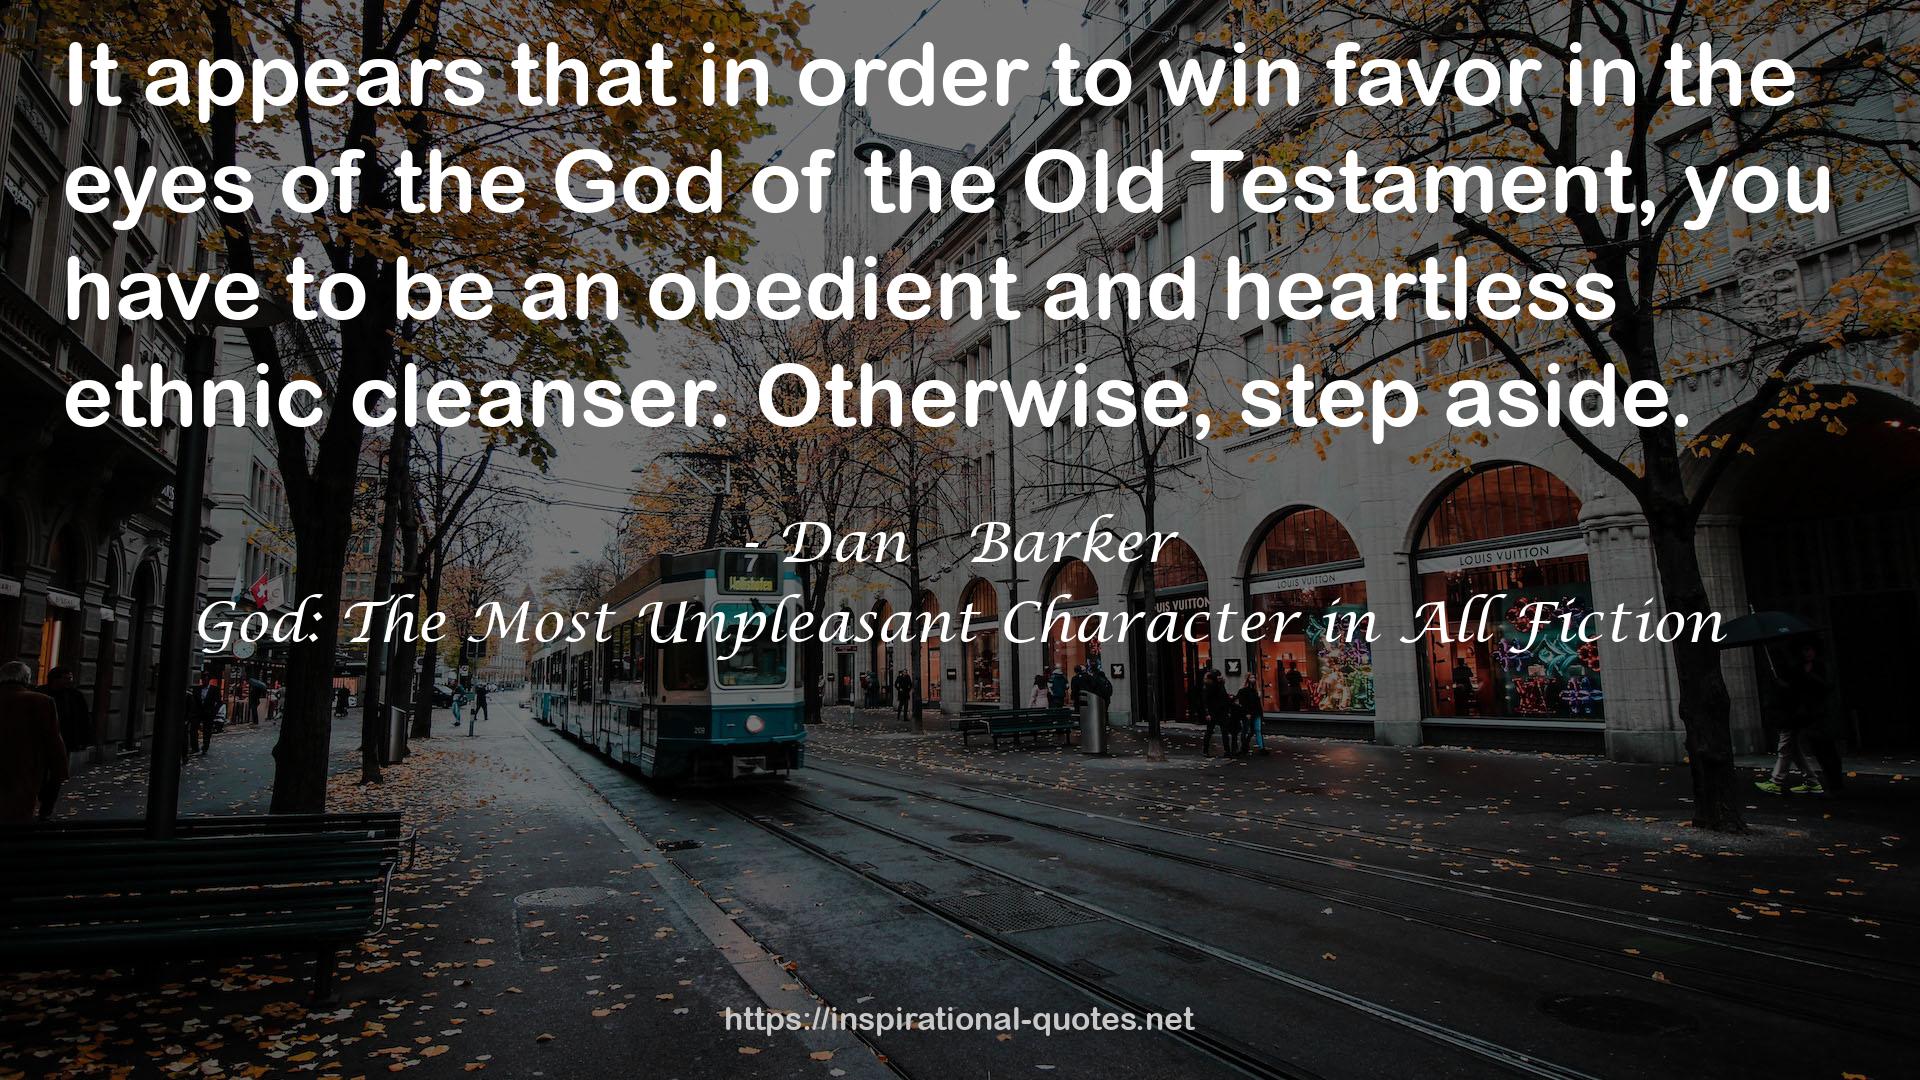 God: The Most Unpleasant Character in All Fiction QUOTES